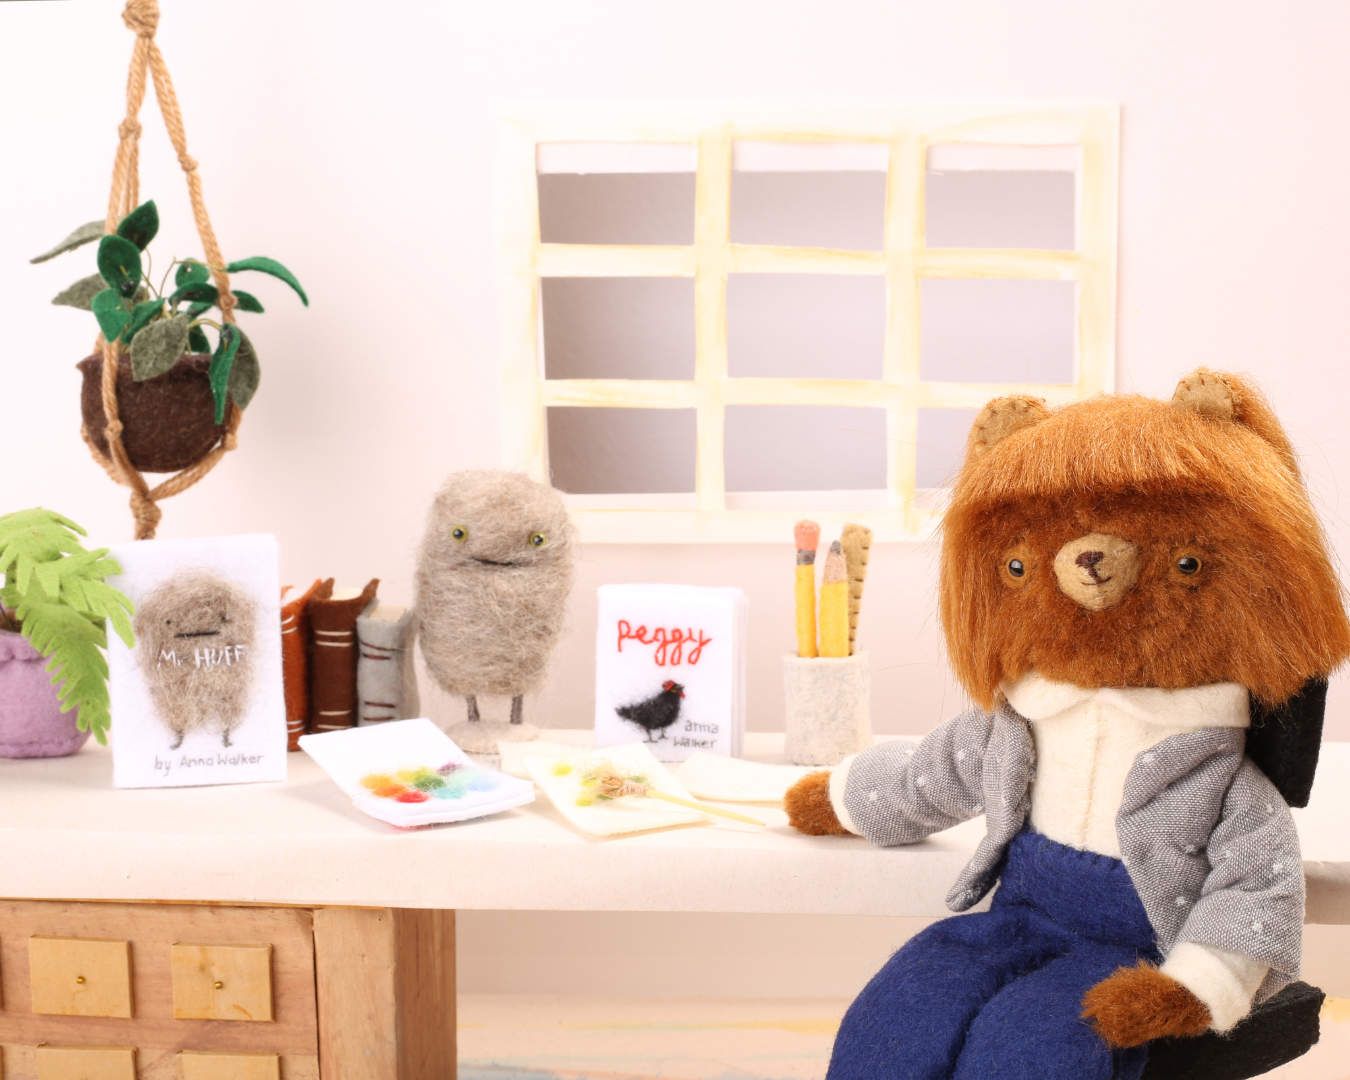 A 3D felted scene of a bear in clothes seated at a desk with books and toy.